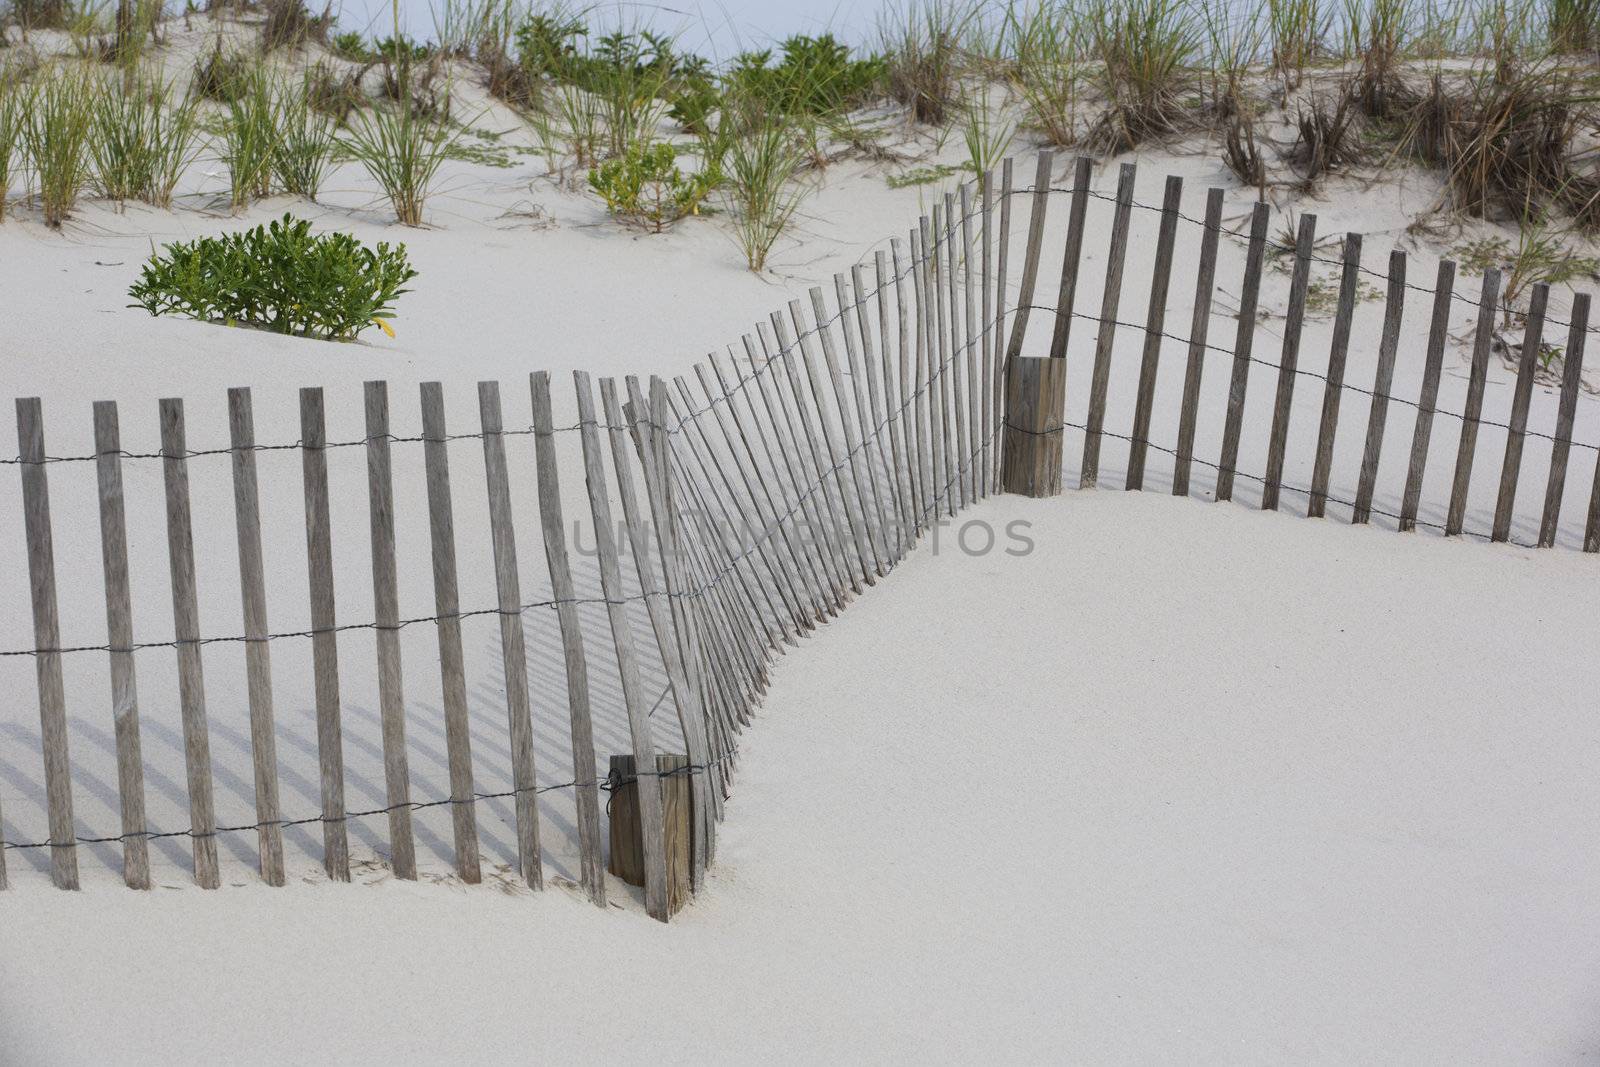 Winding fences and beach grasses by fmcginn